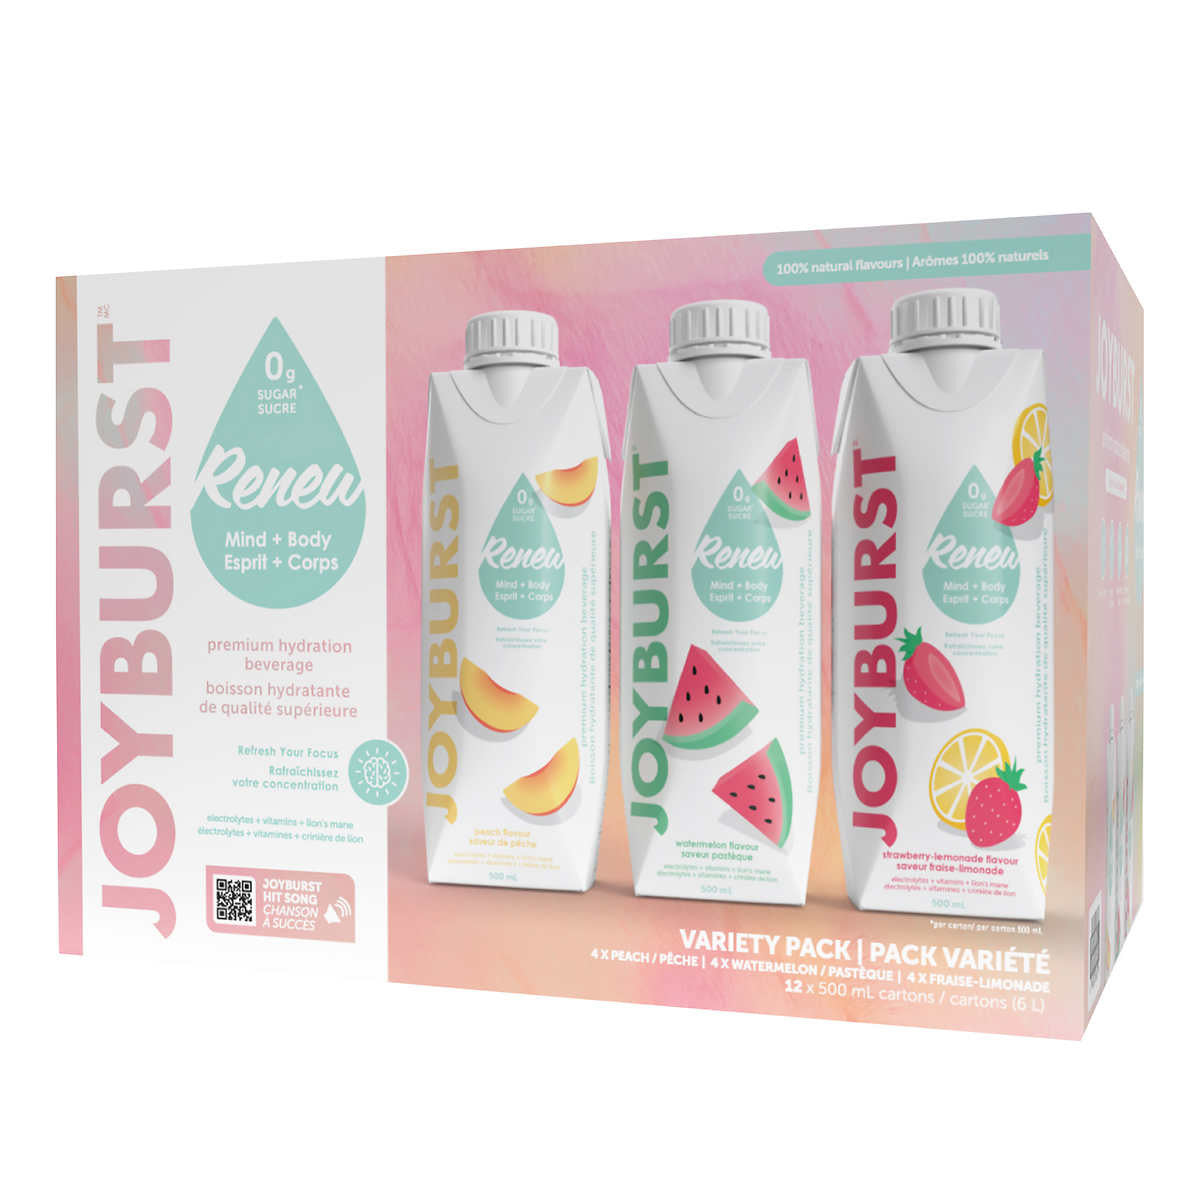 Joyburst Renew Premium Hydration Beverage, Variety Pack, 12 x 500mL/17.5 oz. Cans {Imported from Canada}